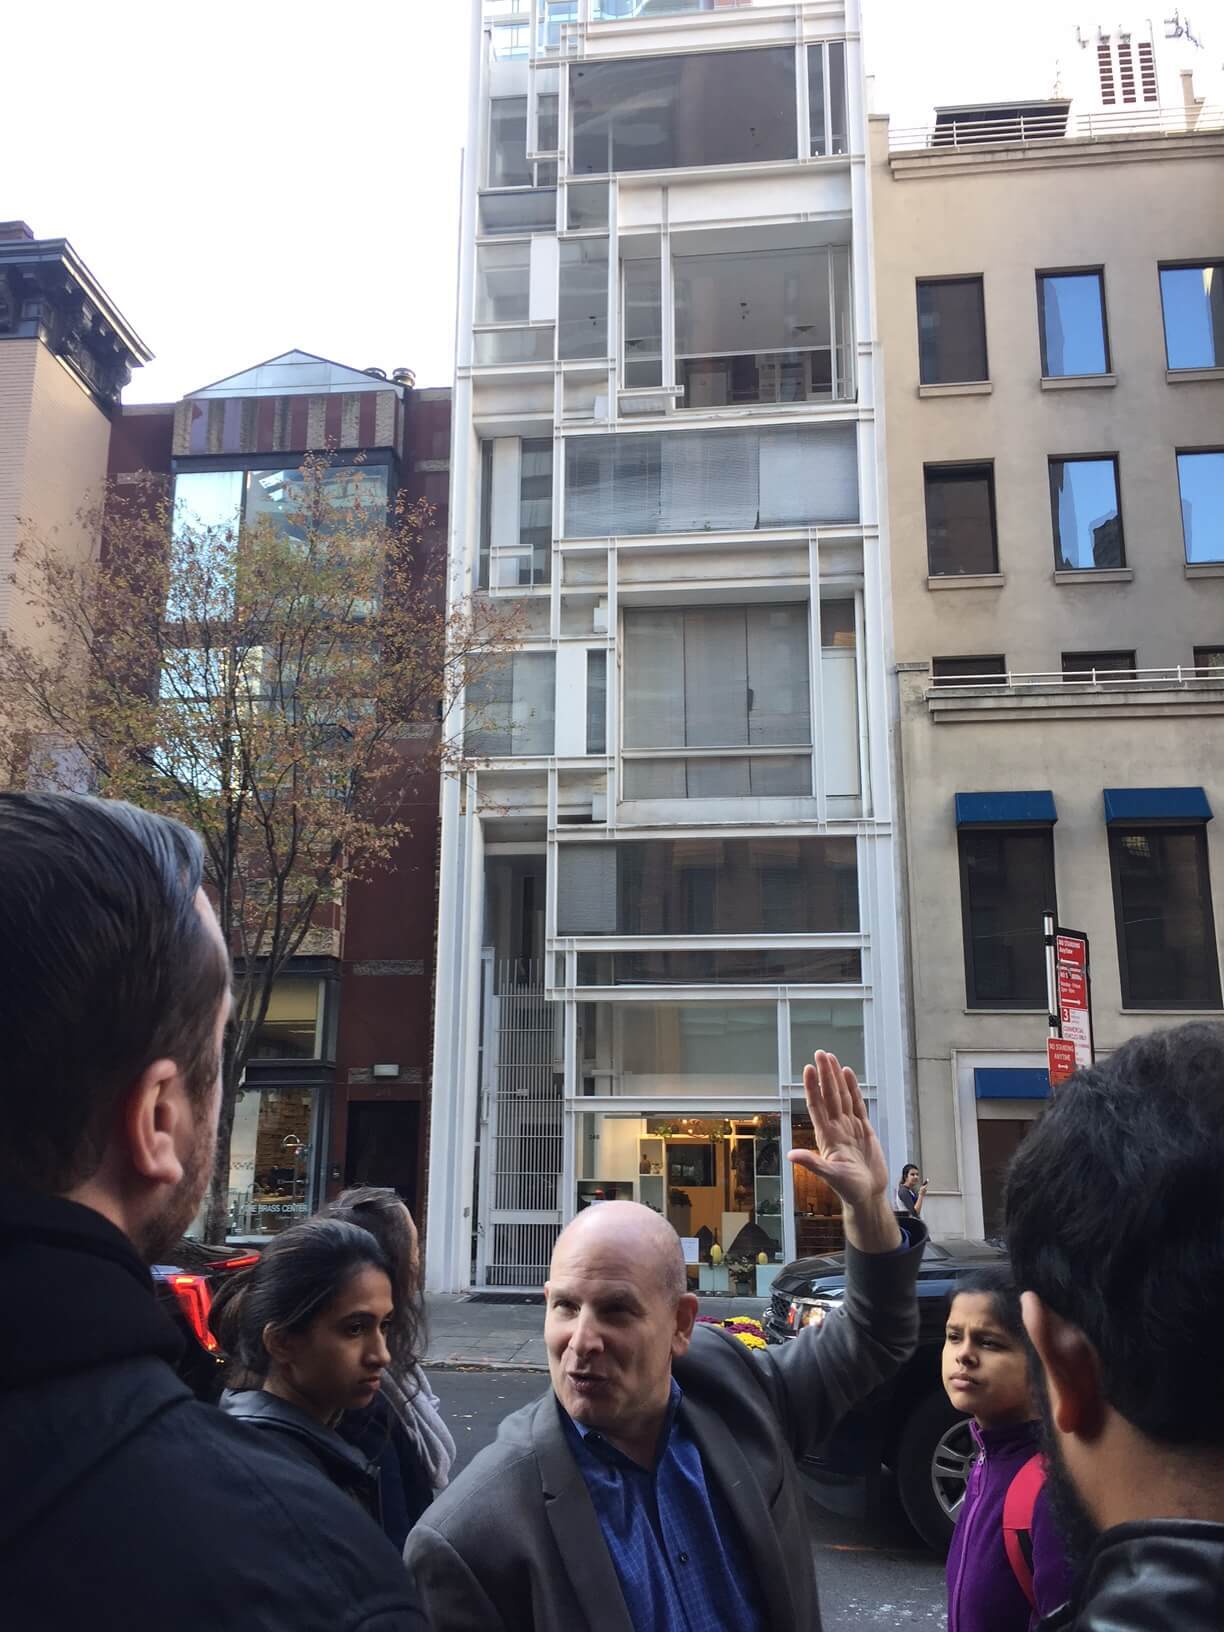 A group stands in front of a building's façade as they discuss its attributes. The building is located in an urban environment.